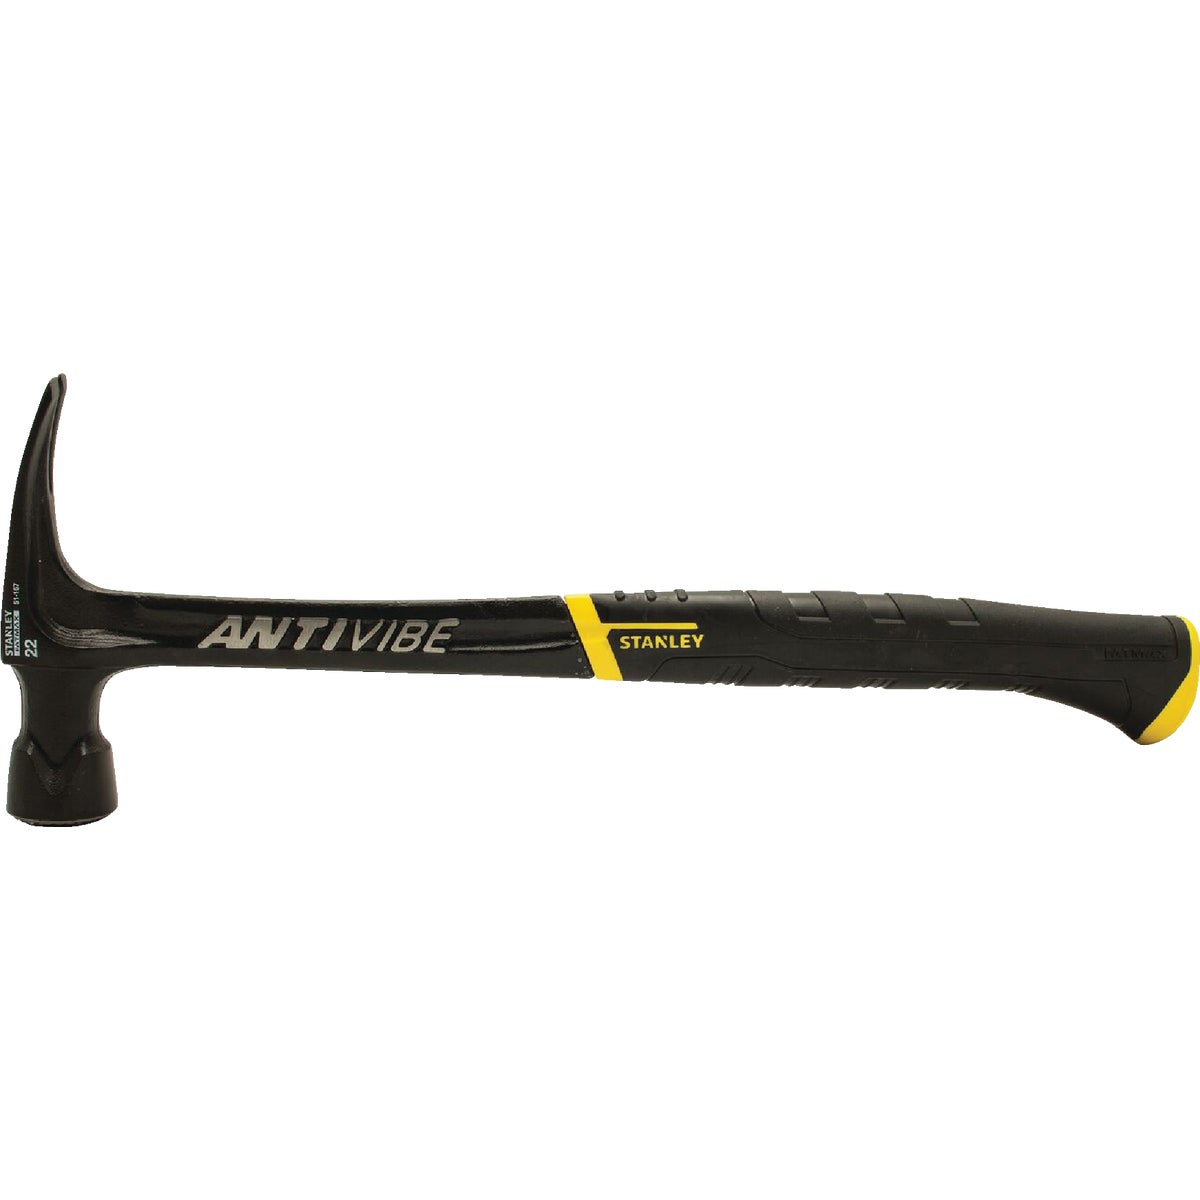 Stanley FatMax Anti-Vibe 22 Oz. Milled-Face Framing Hammer with Steel Handle